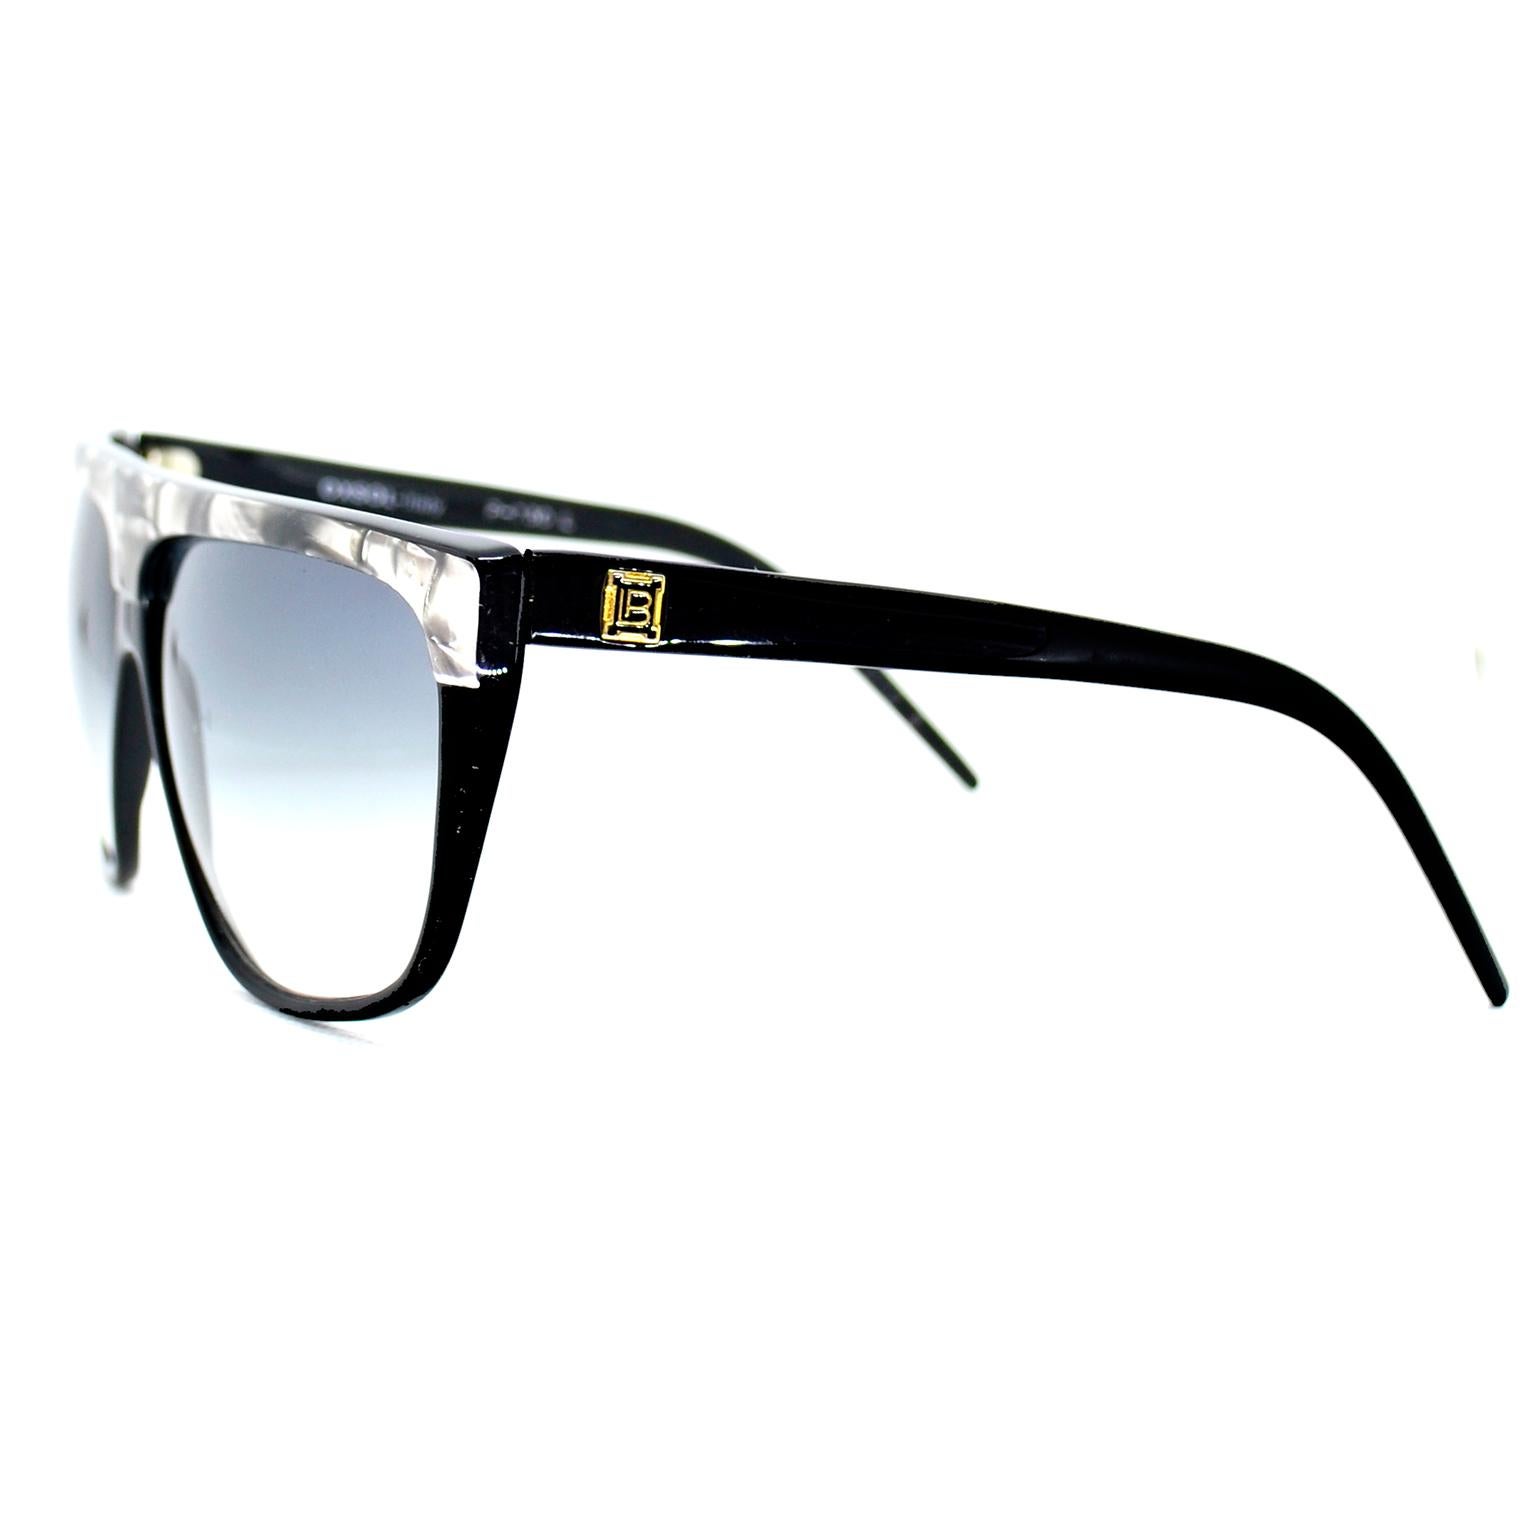 Women's Laura Biagiotti Black and Silver Marbled Vintage Sunglasses